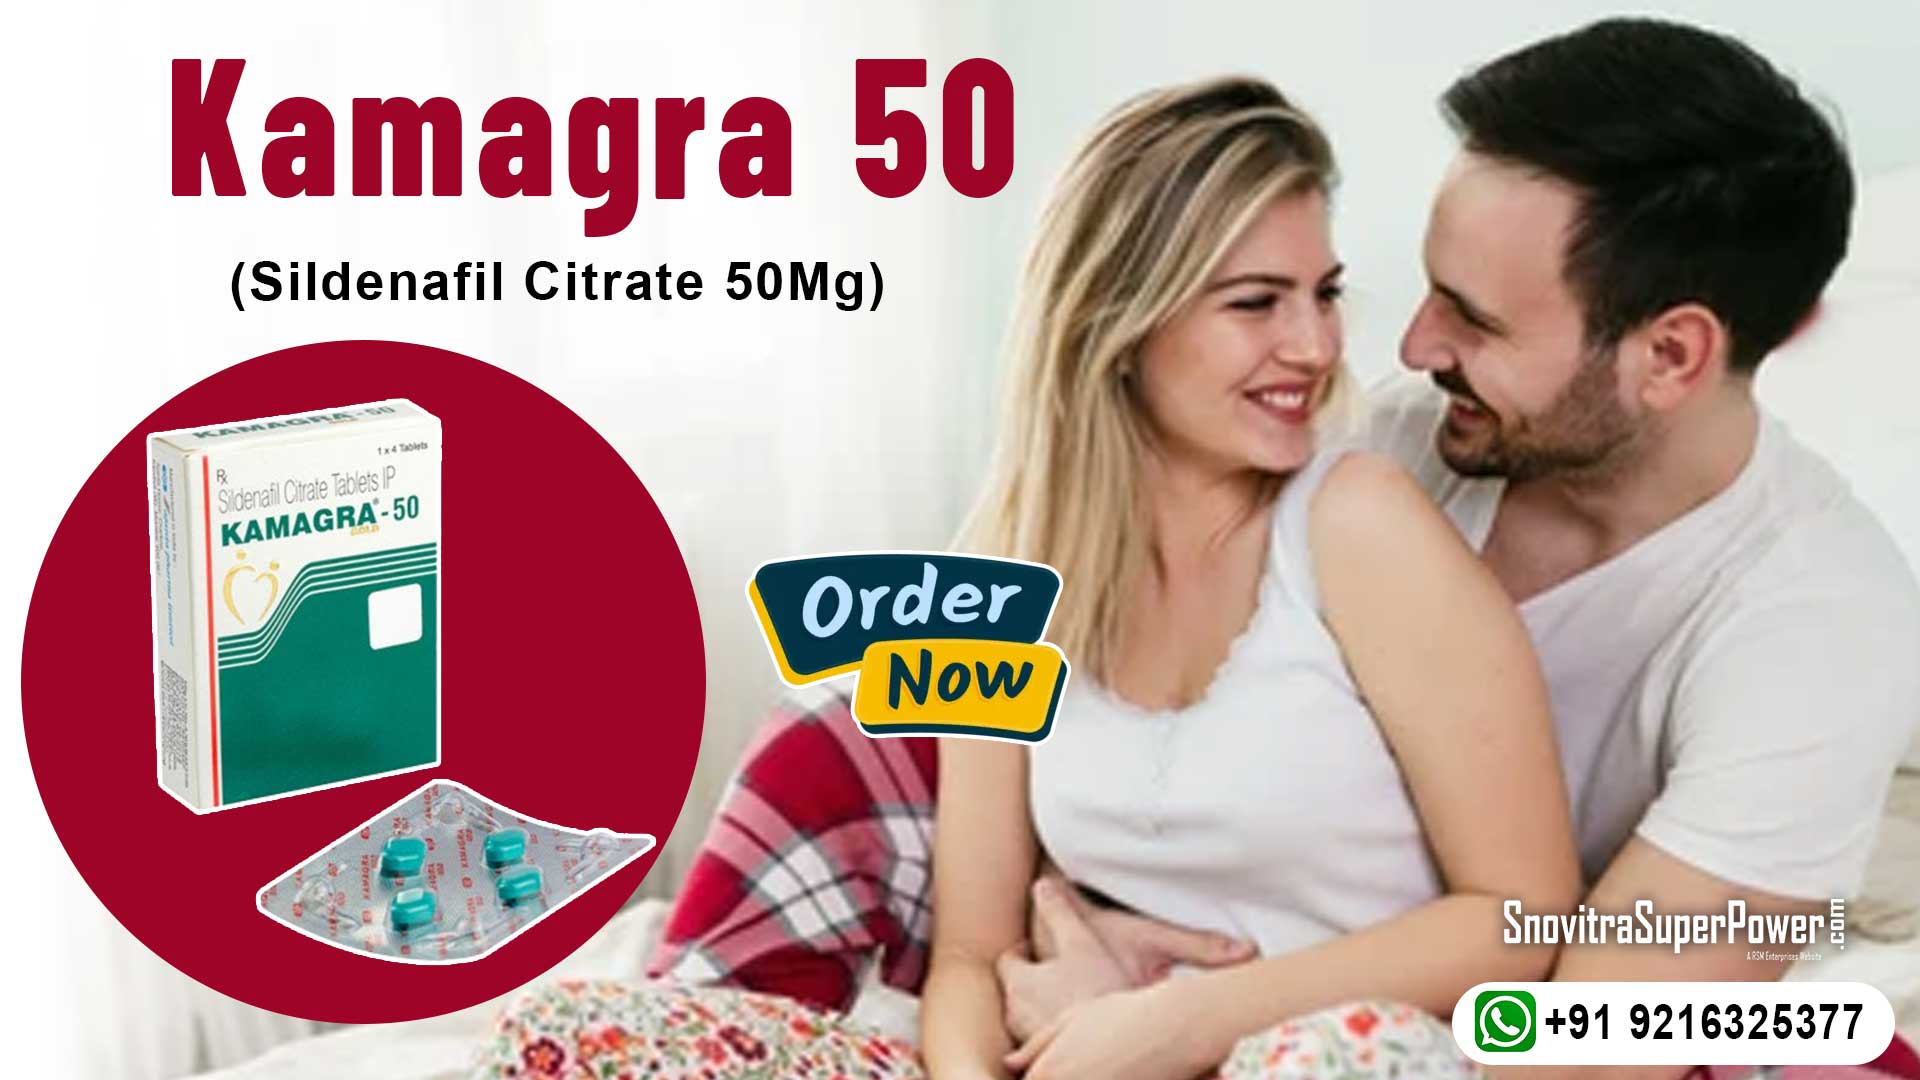 Kamagra 50 Mg: A Superb Medication to Fix Erection Failure in Males